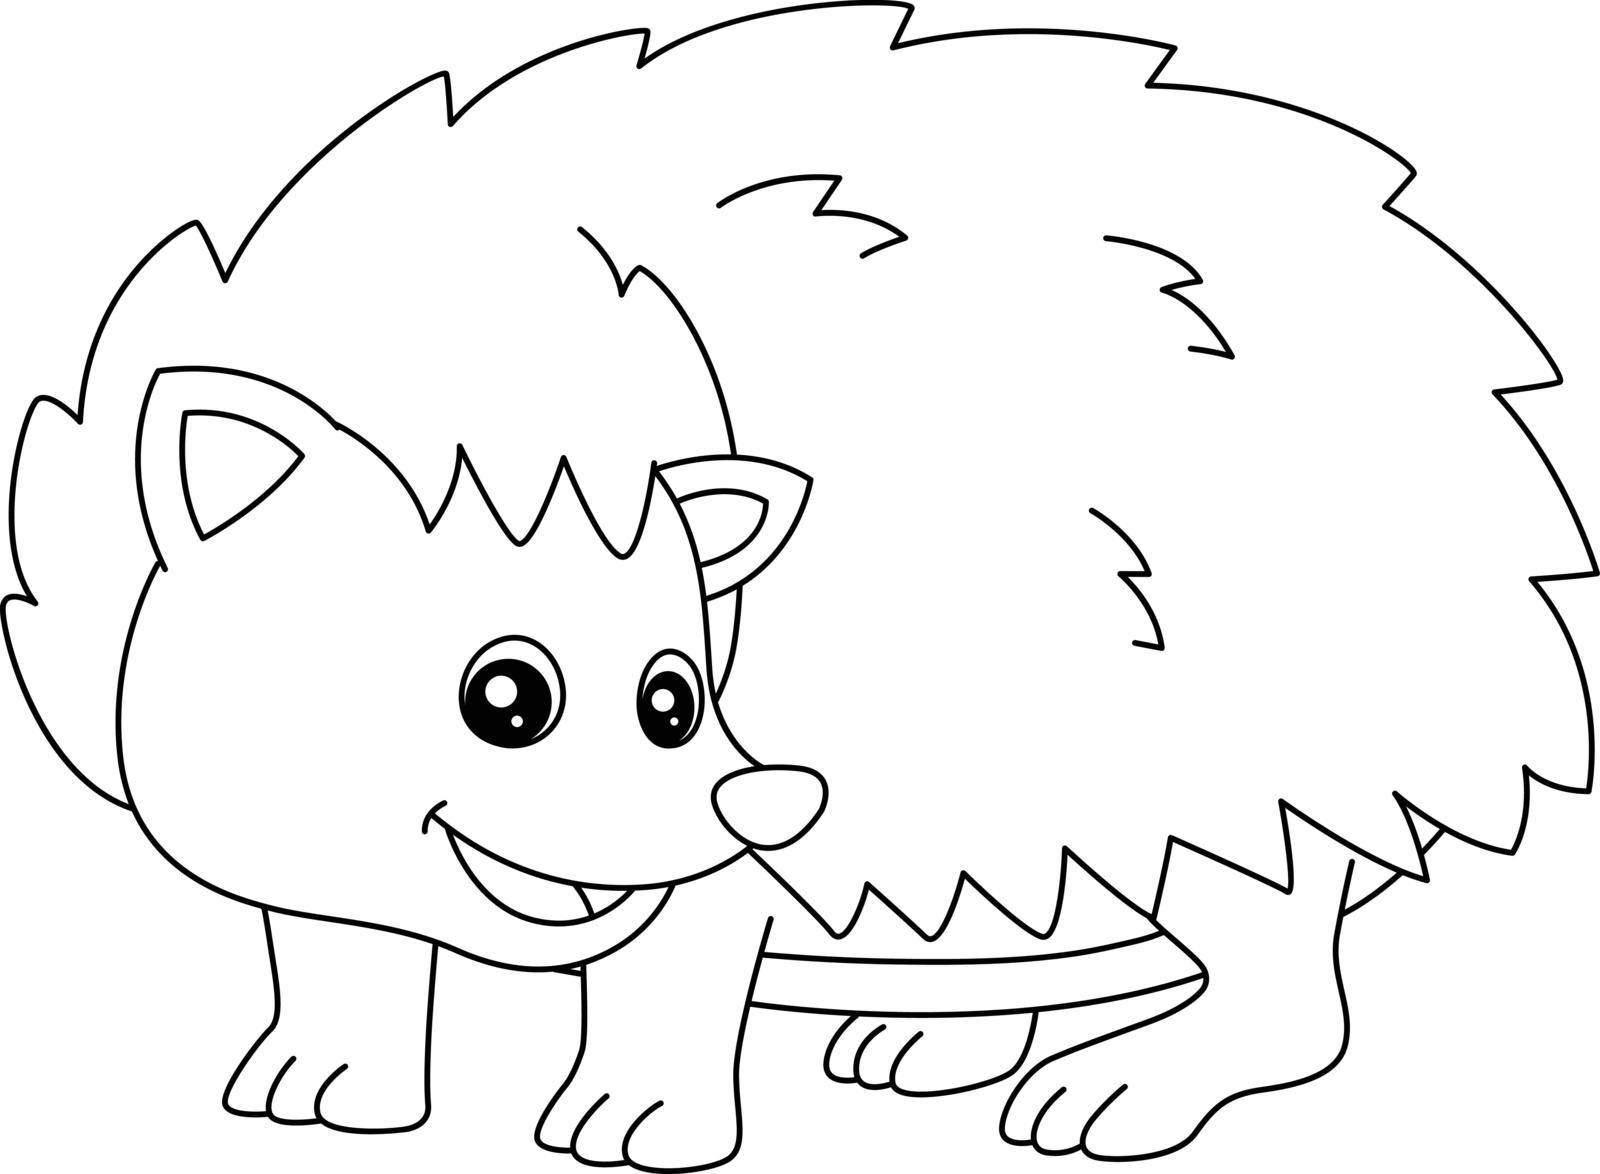 Hedgehog Coloring Page Isolated for Kids by abbydesign